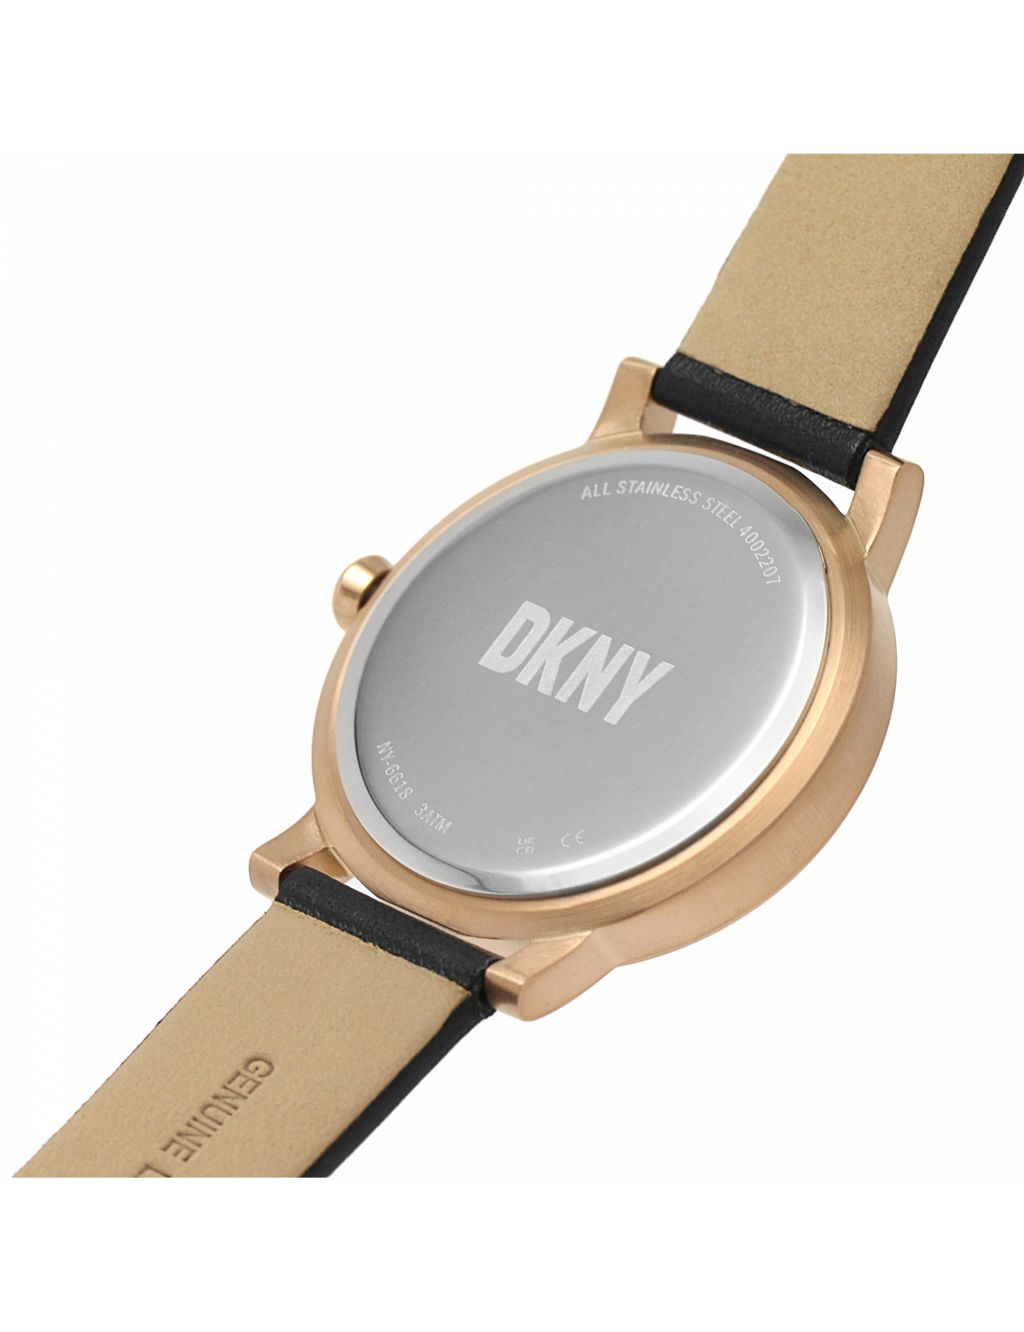 DKNY 7th Avenue Black Leather Watch image 7